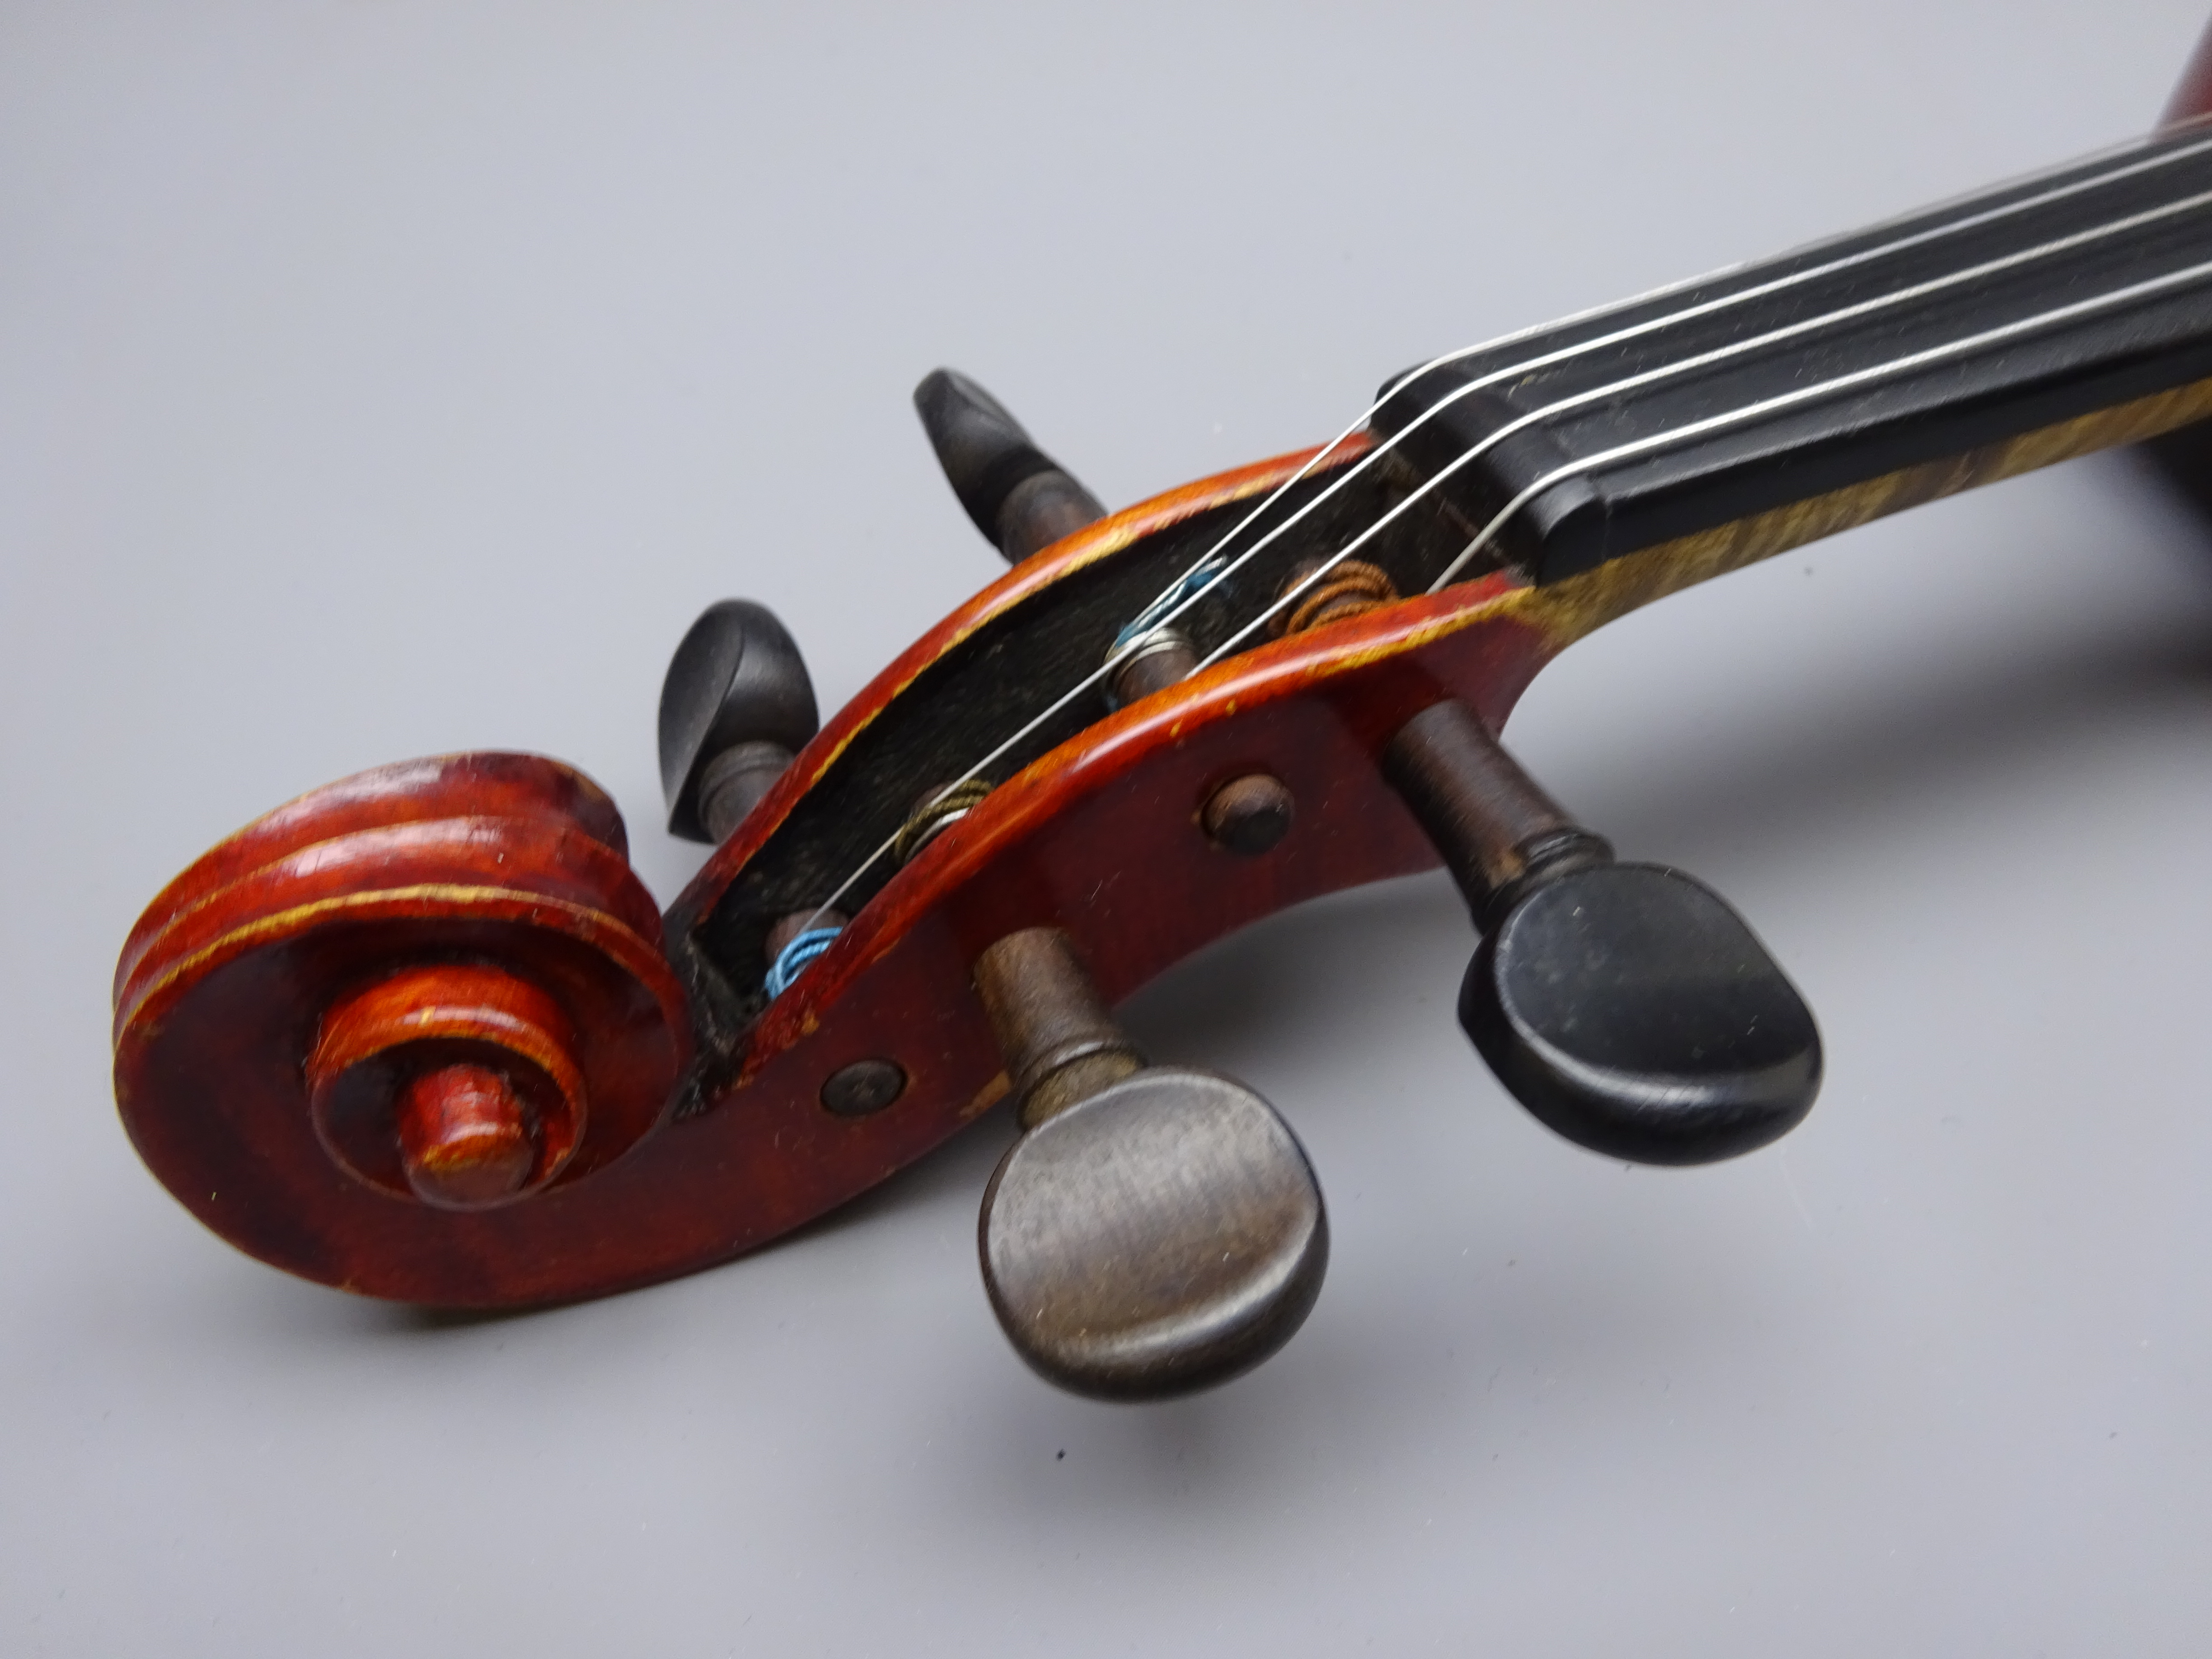 Early 20th century violin, French or German, with 36cm one-piece maple back and ribs and spruce top, - Image 4 of 9